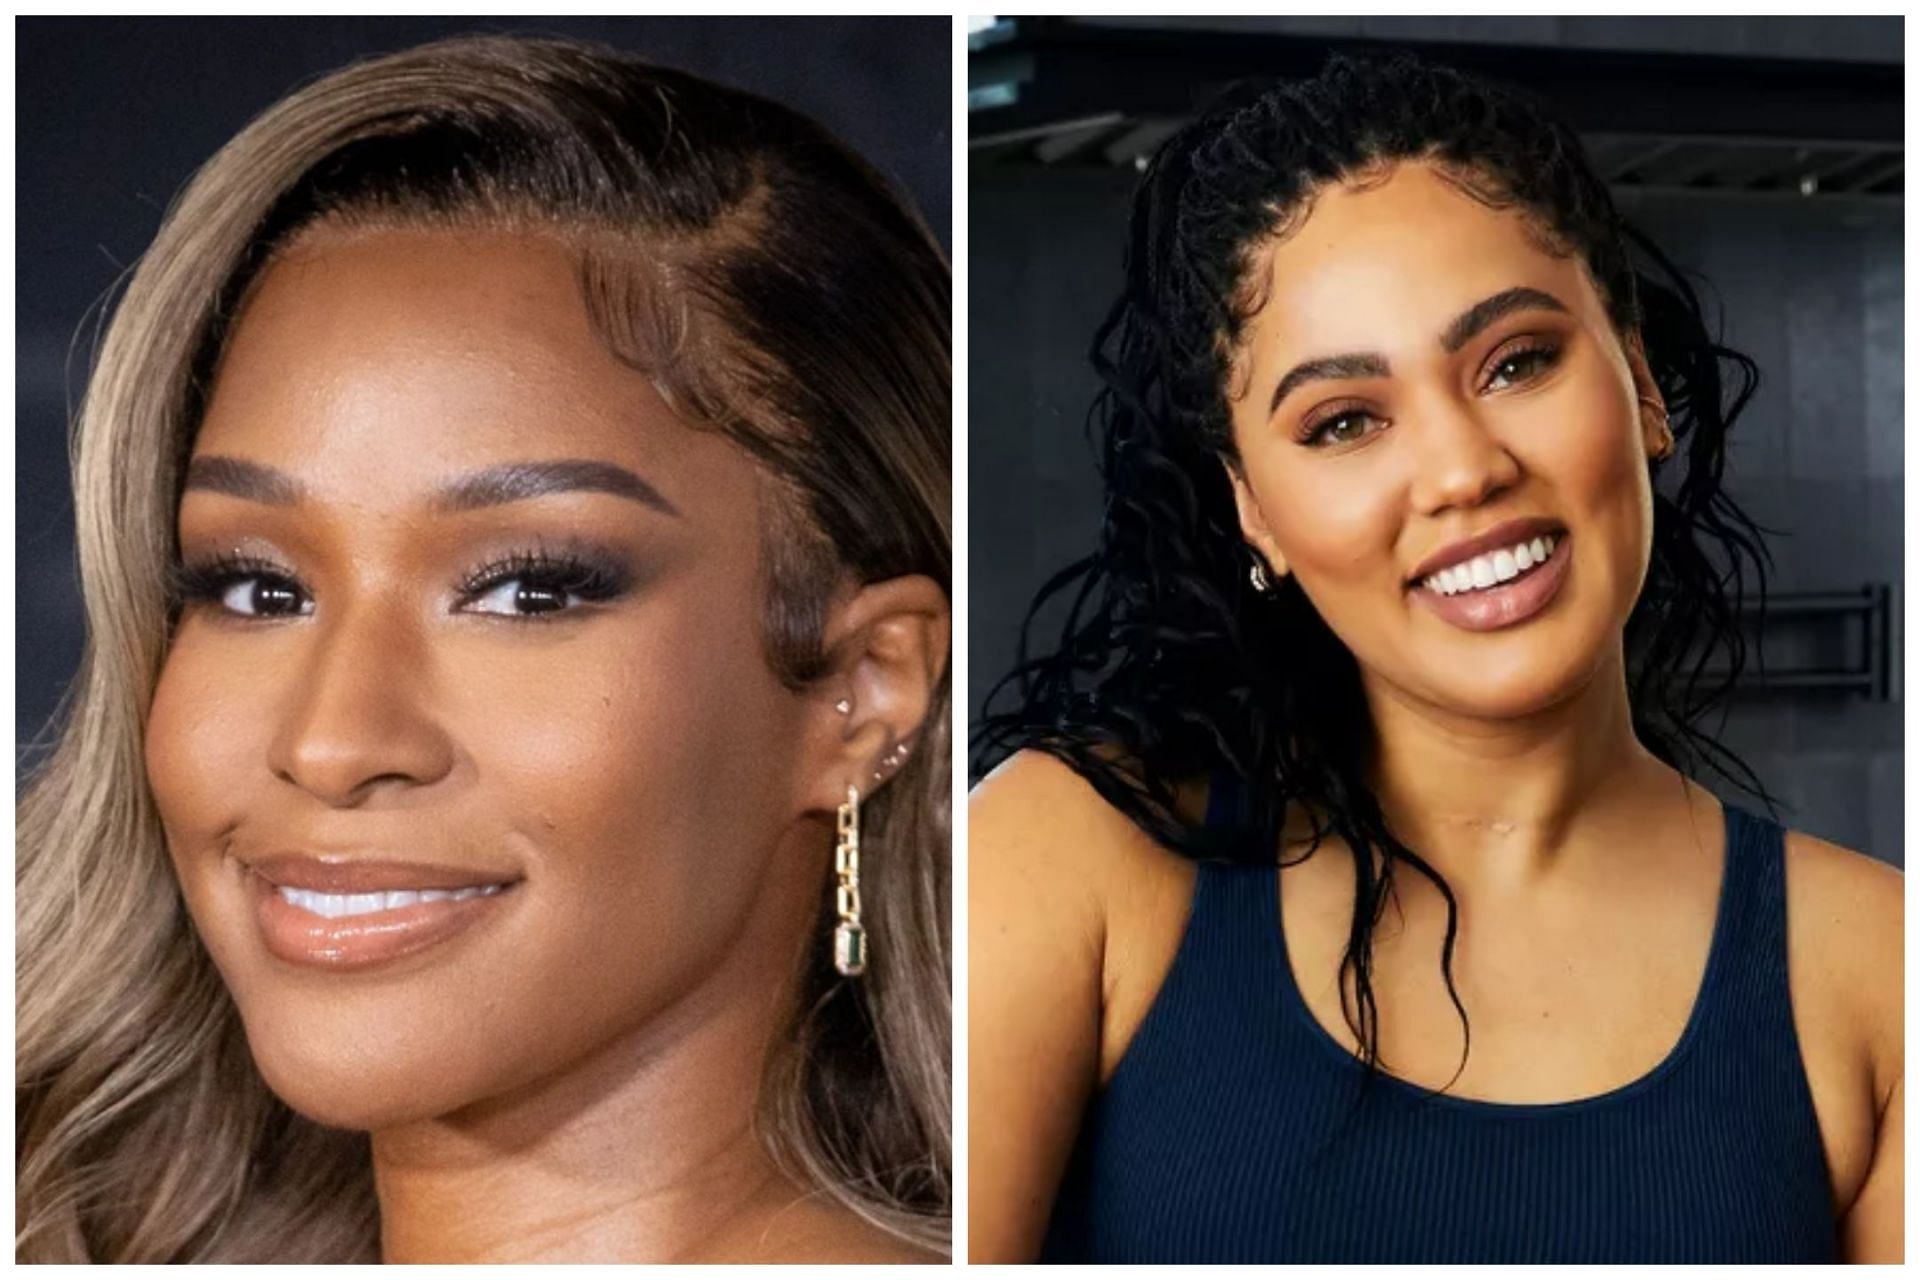 Savannah James (left) and Ayesha Curry (right) are among the most famous NBA wives with millions of Instagram followers